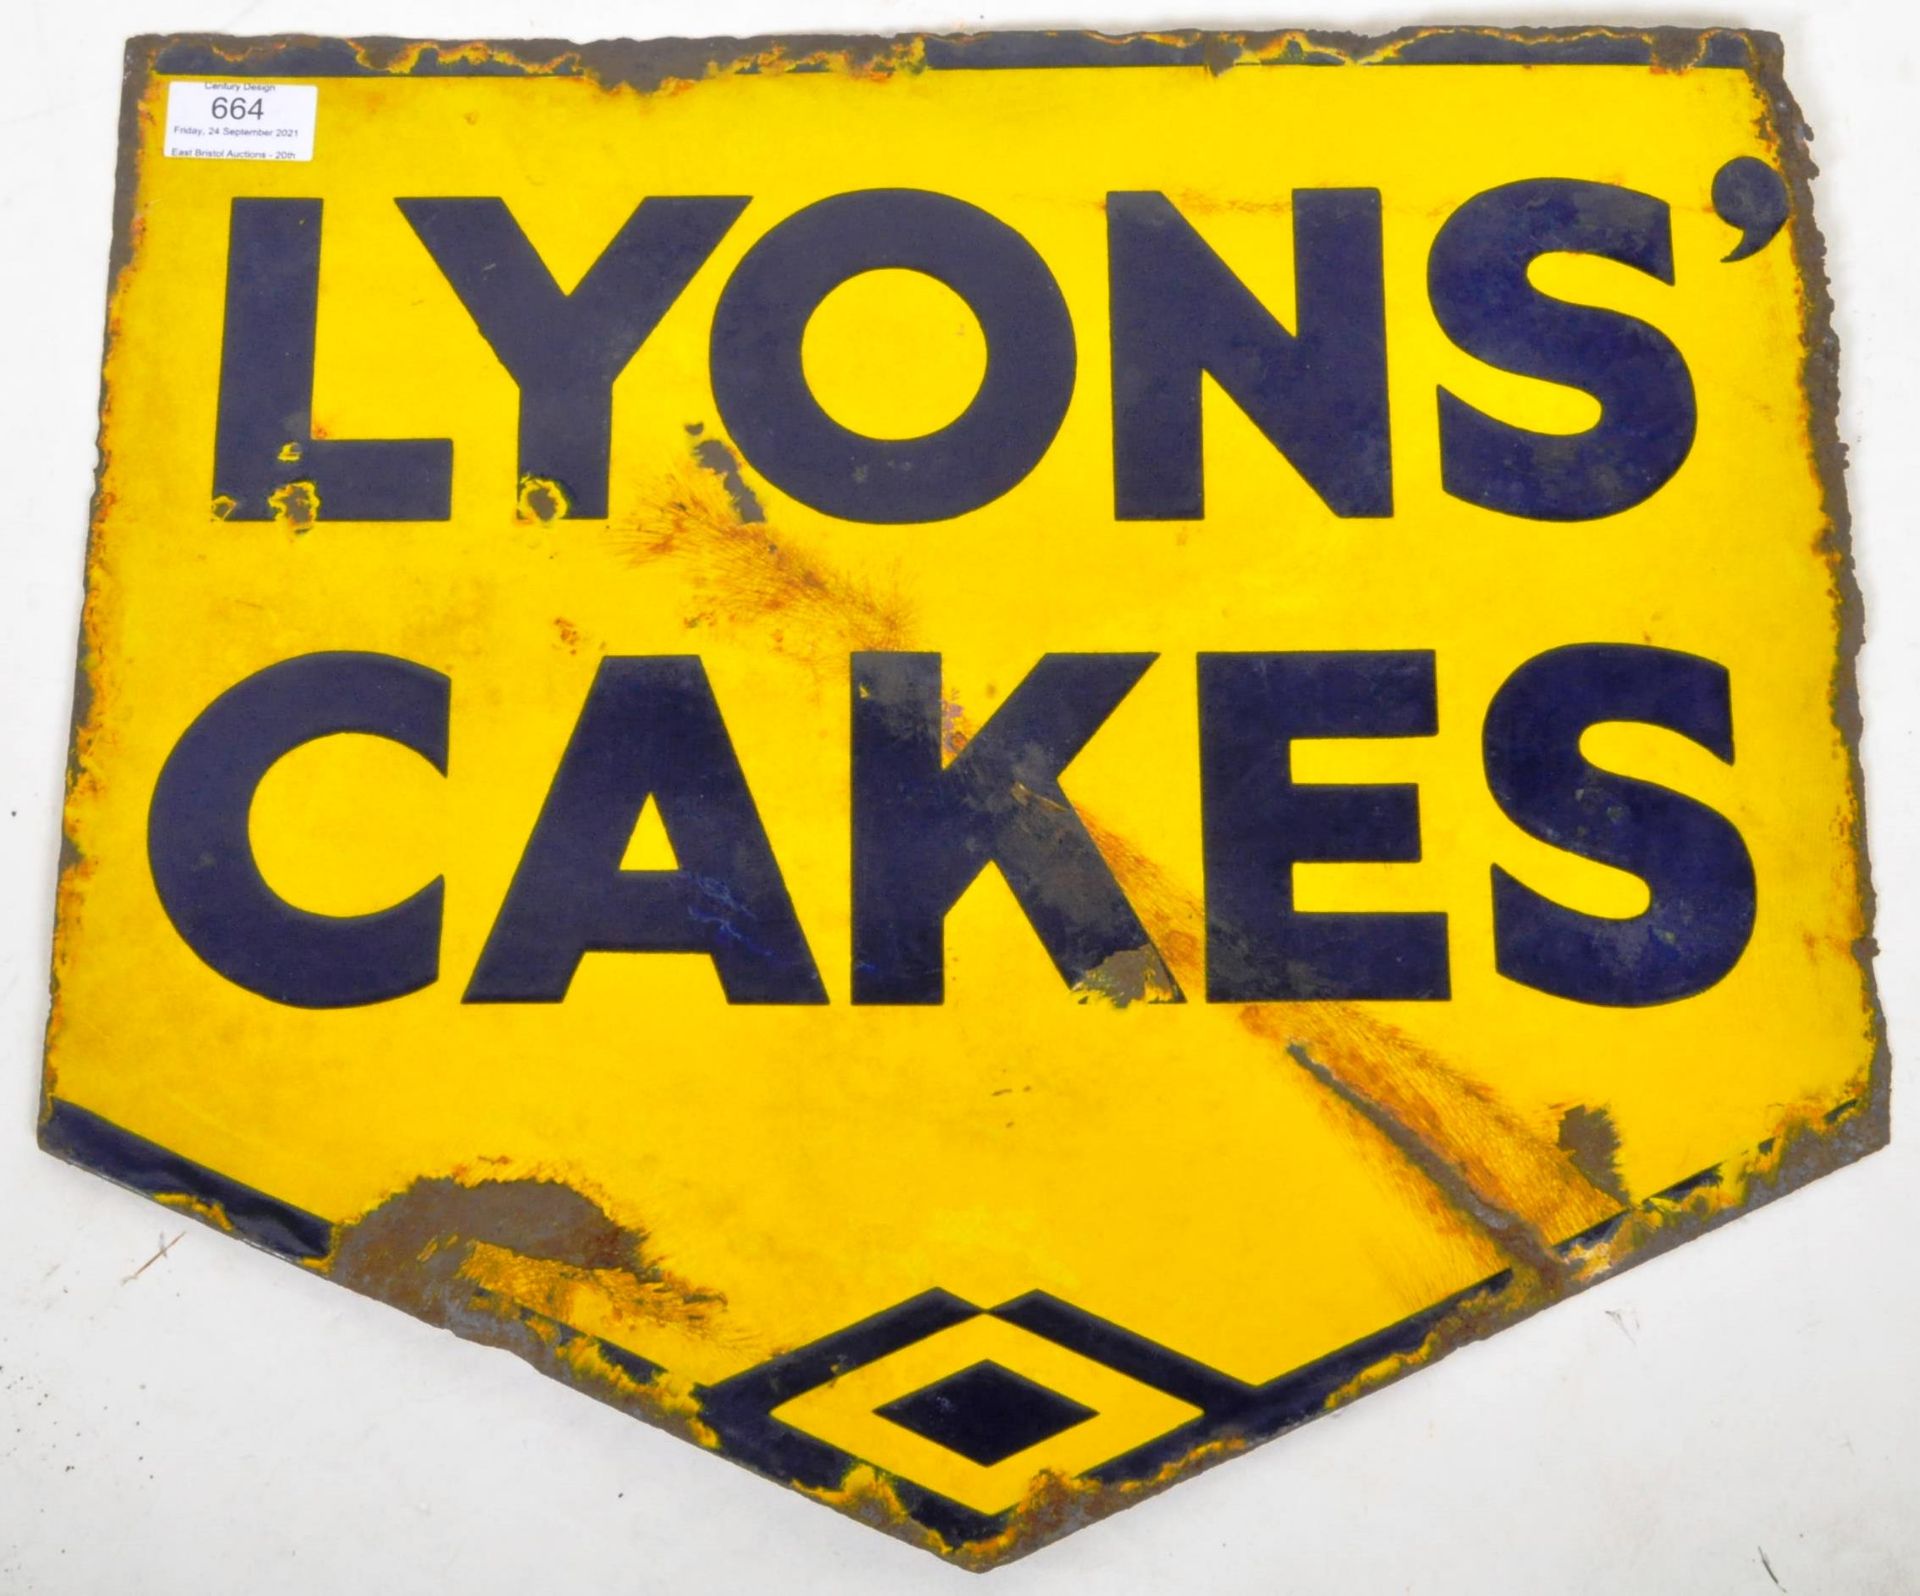 LYONS CAKES - MID 20TH CENTURY DOUBLE SIDED ENAMEL SIGN - Image 2 of 4